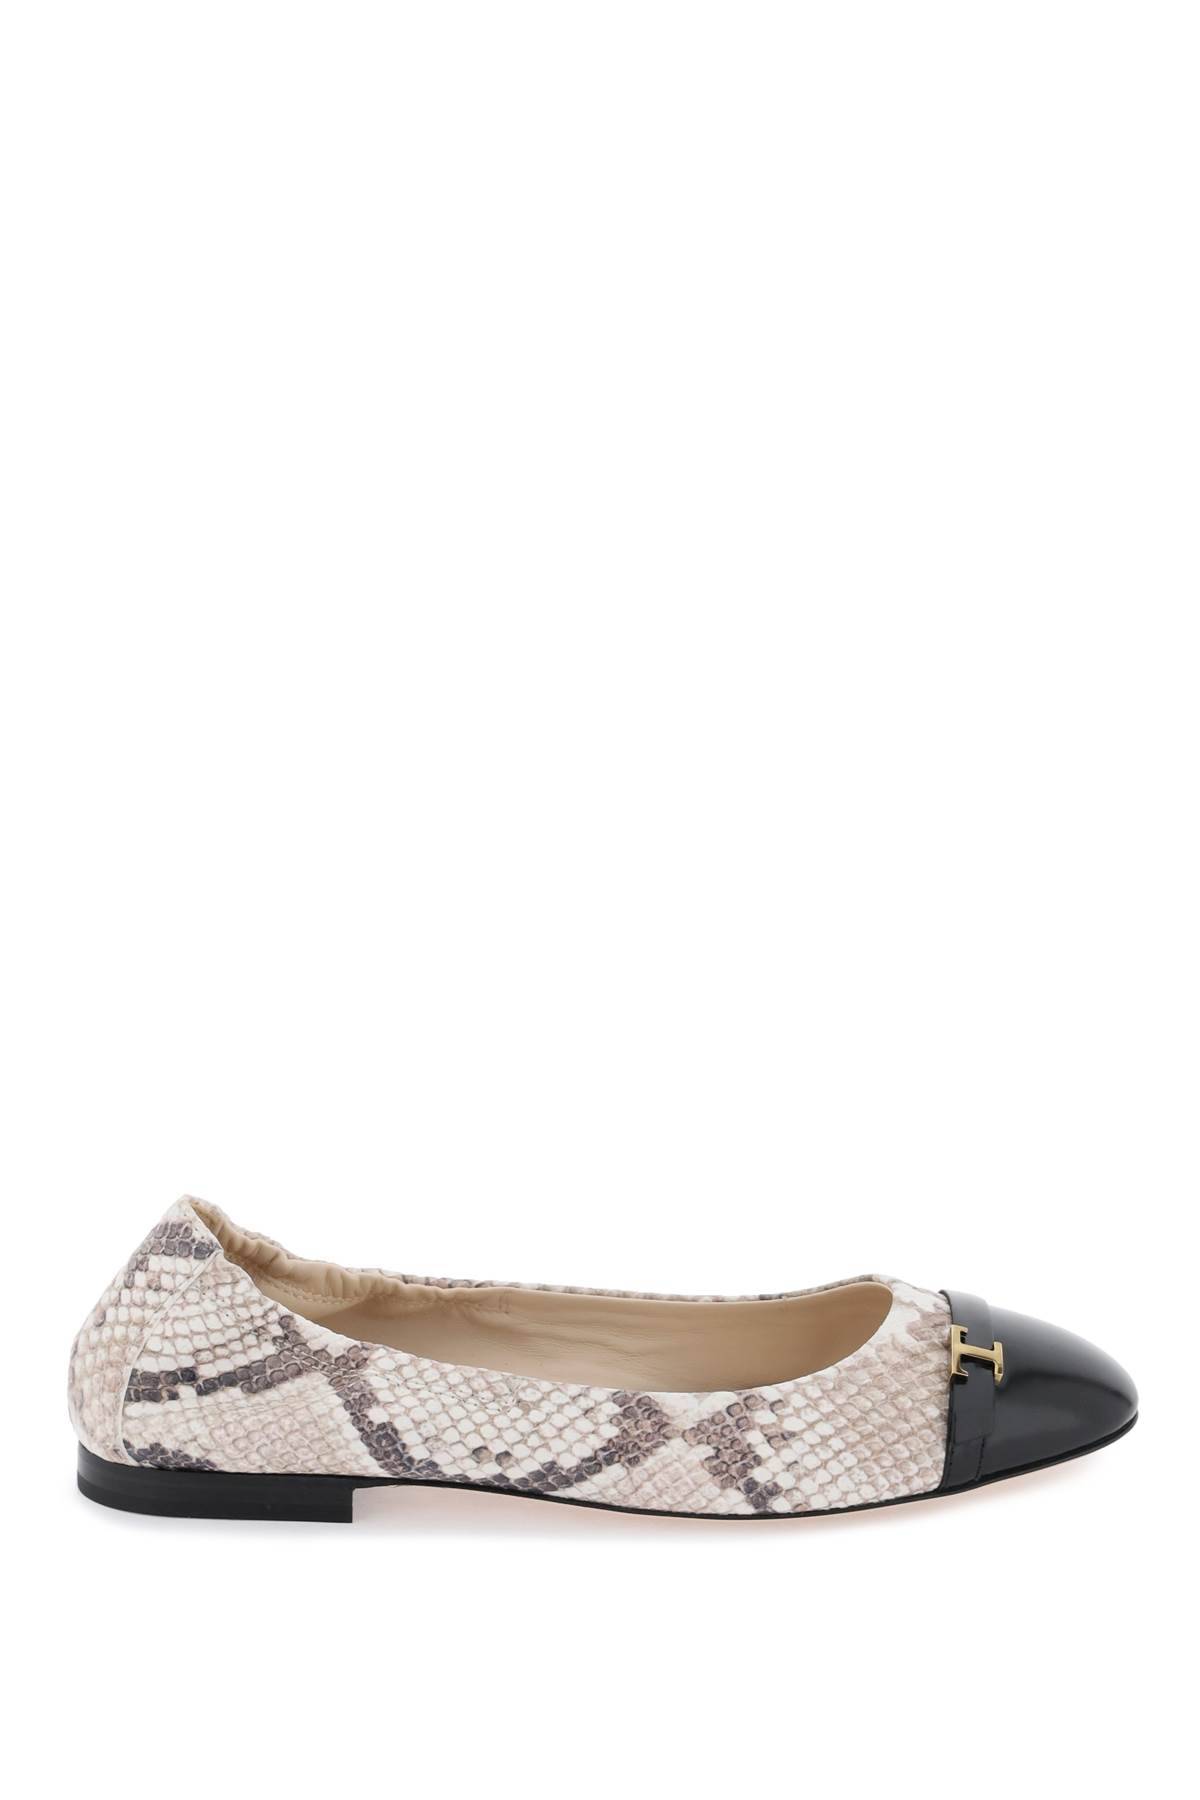 TOD'S snake-printed leather ballet flats